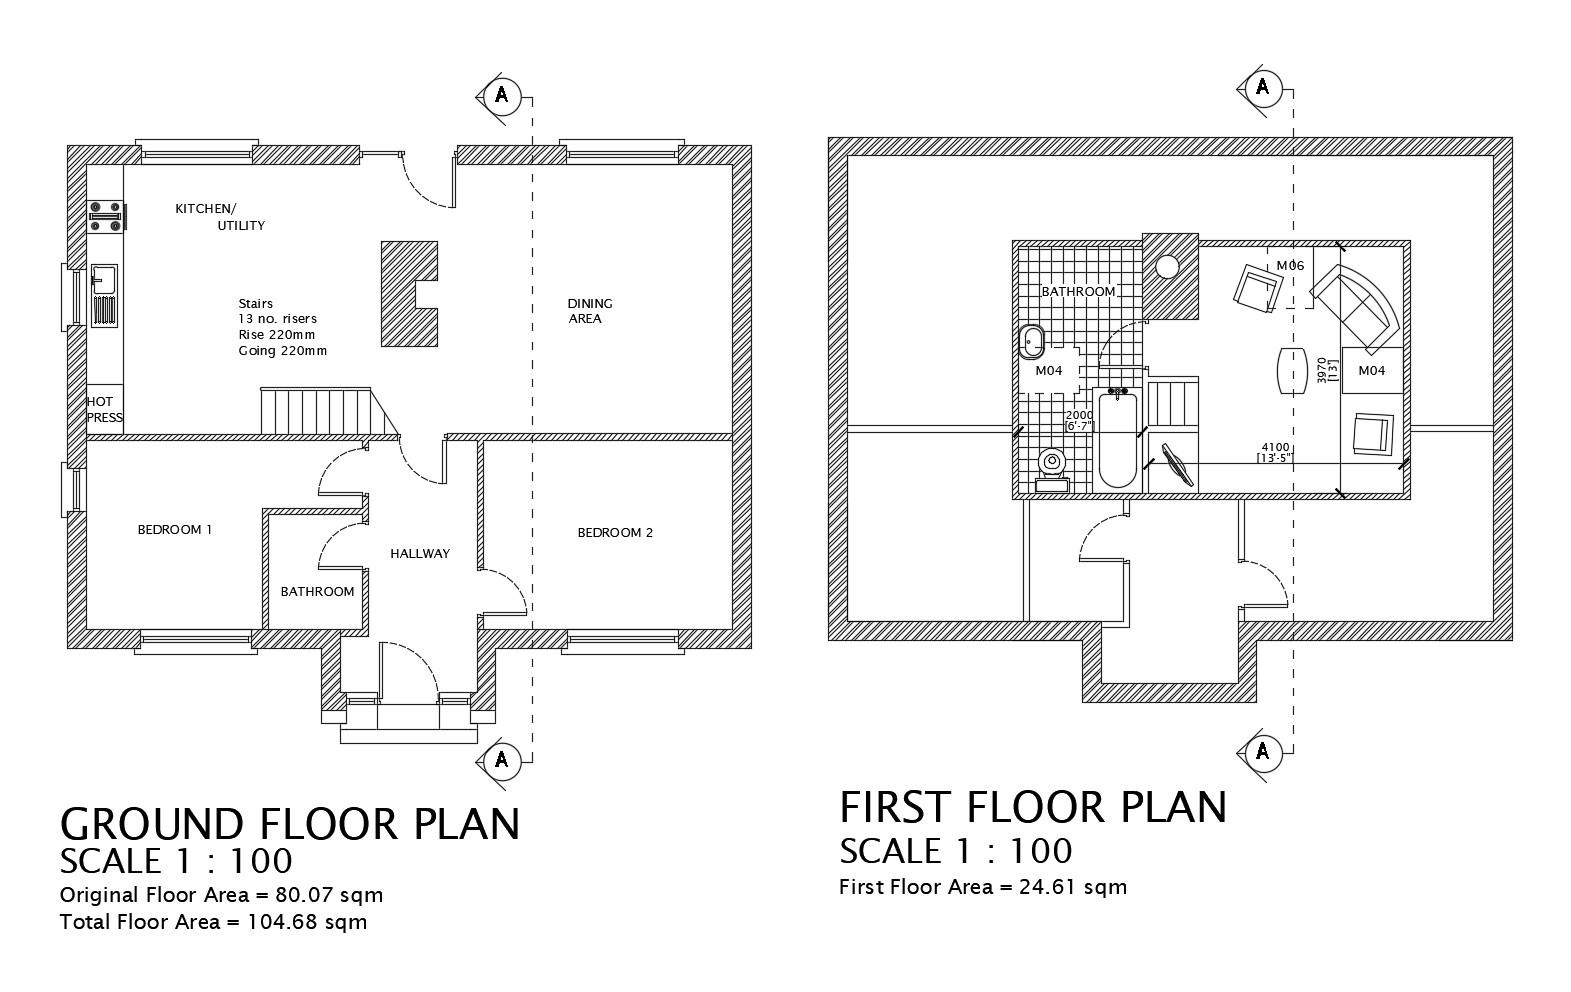 Floor plan of 2 storey residential house with detail